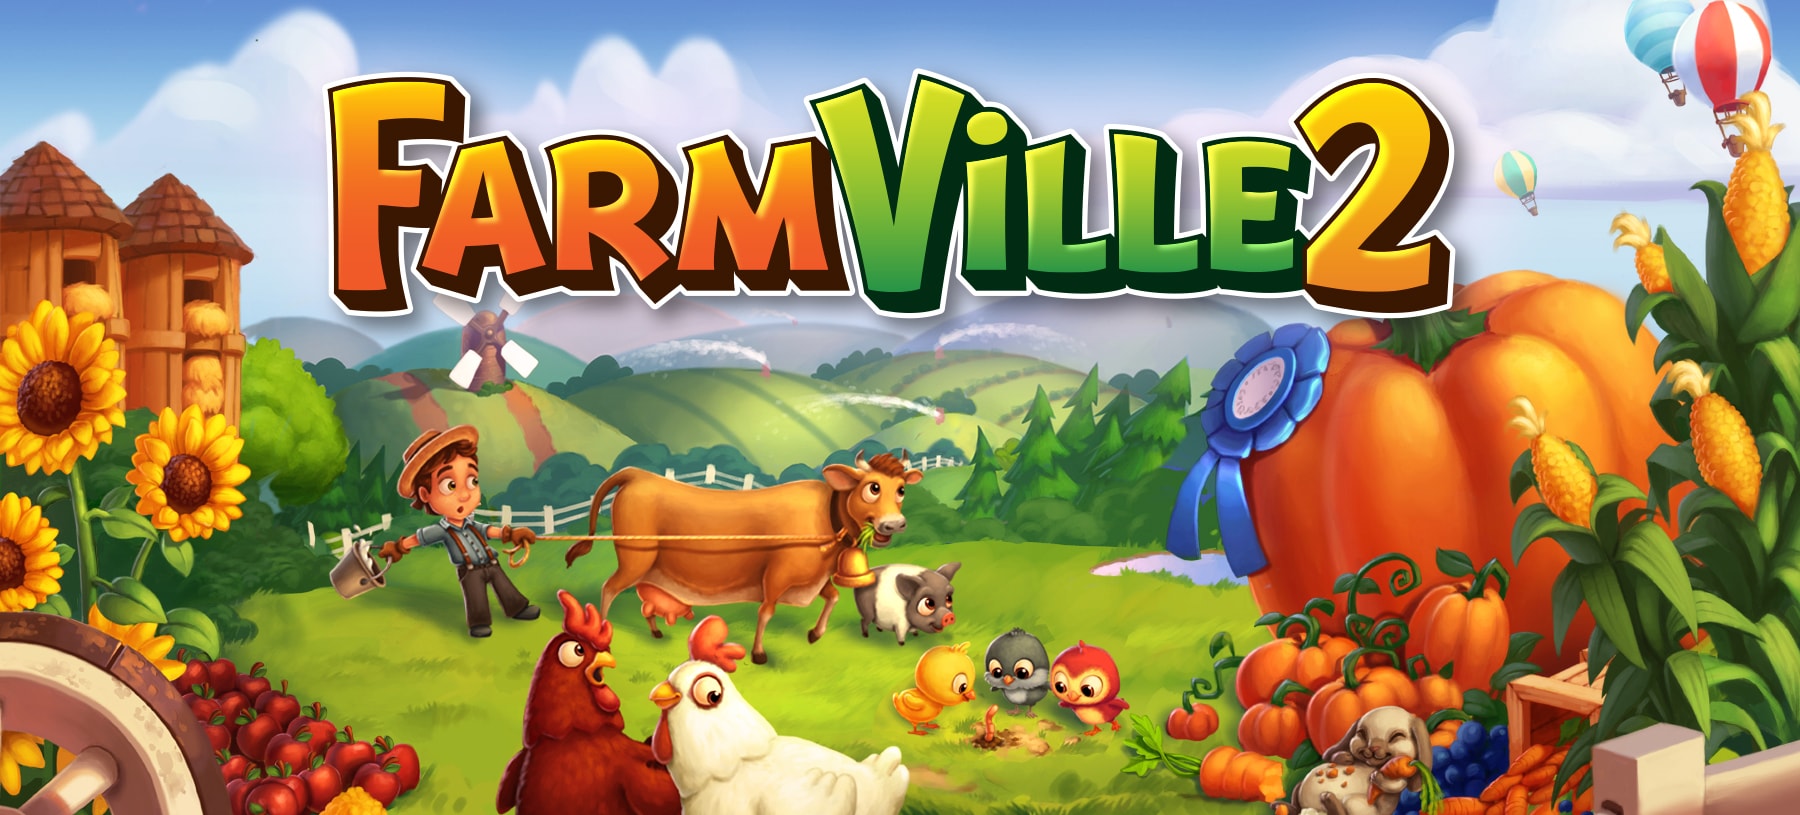 how to download farmville 2 on pc